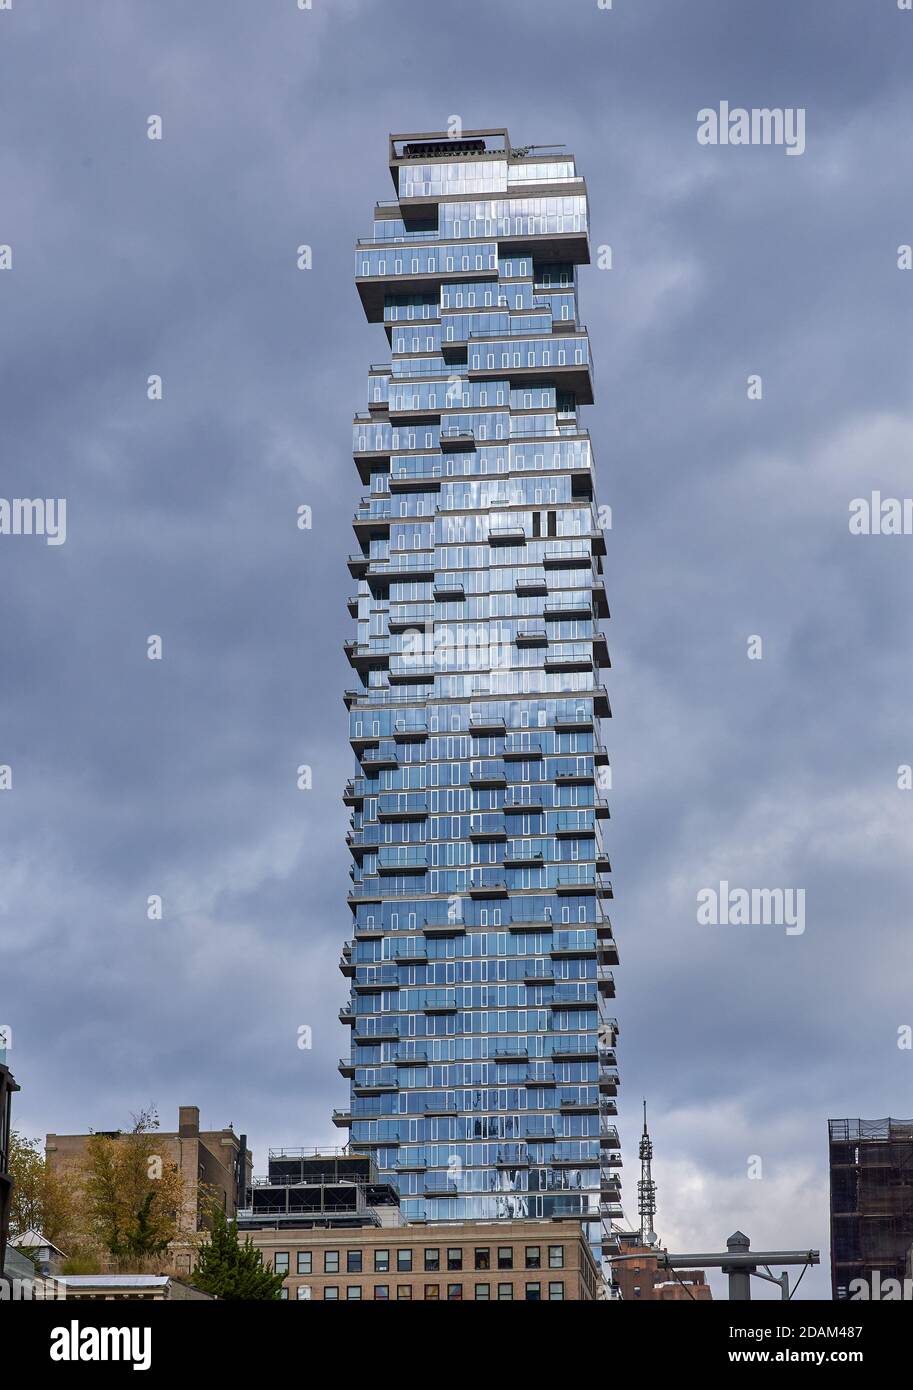 New York, NY - November 3 2020: 56 Leonard St or Jenga Tower (2017) catches the sunlight on a grey autumn day. It is a 60 story residence that looks l Stock Photo